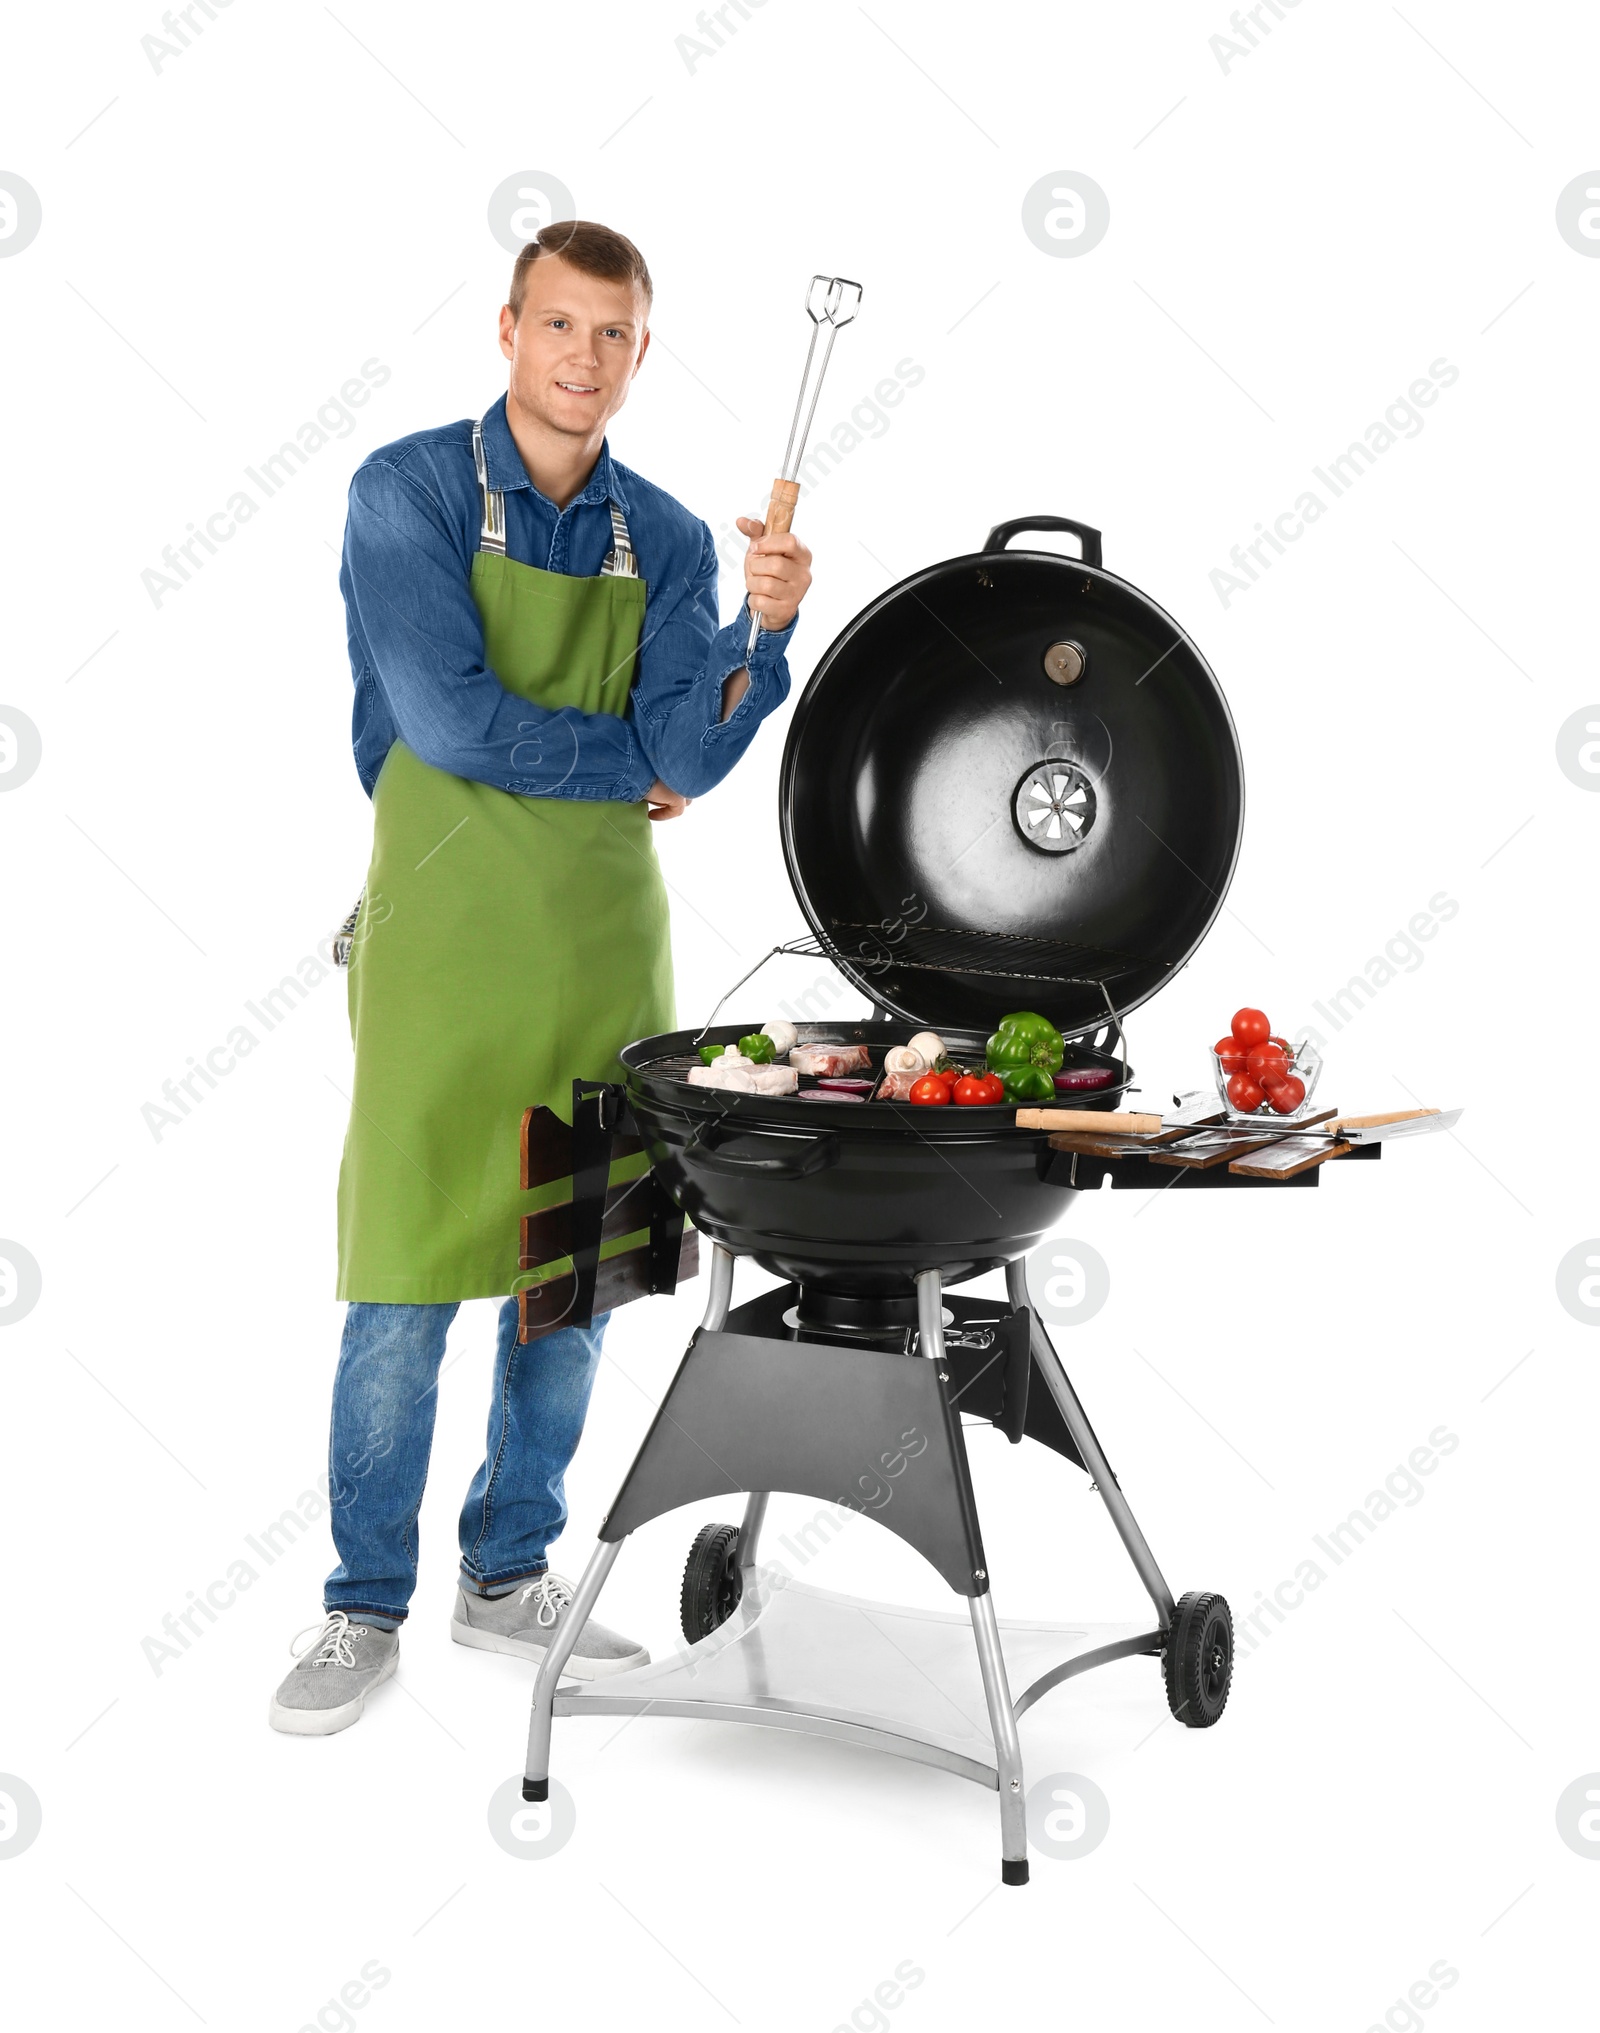 Photo of Man in apron cooking on barbecue grill, white background